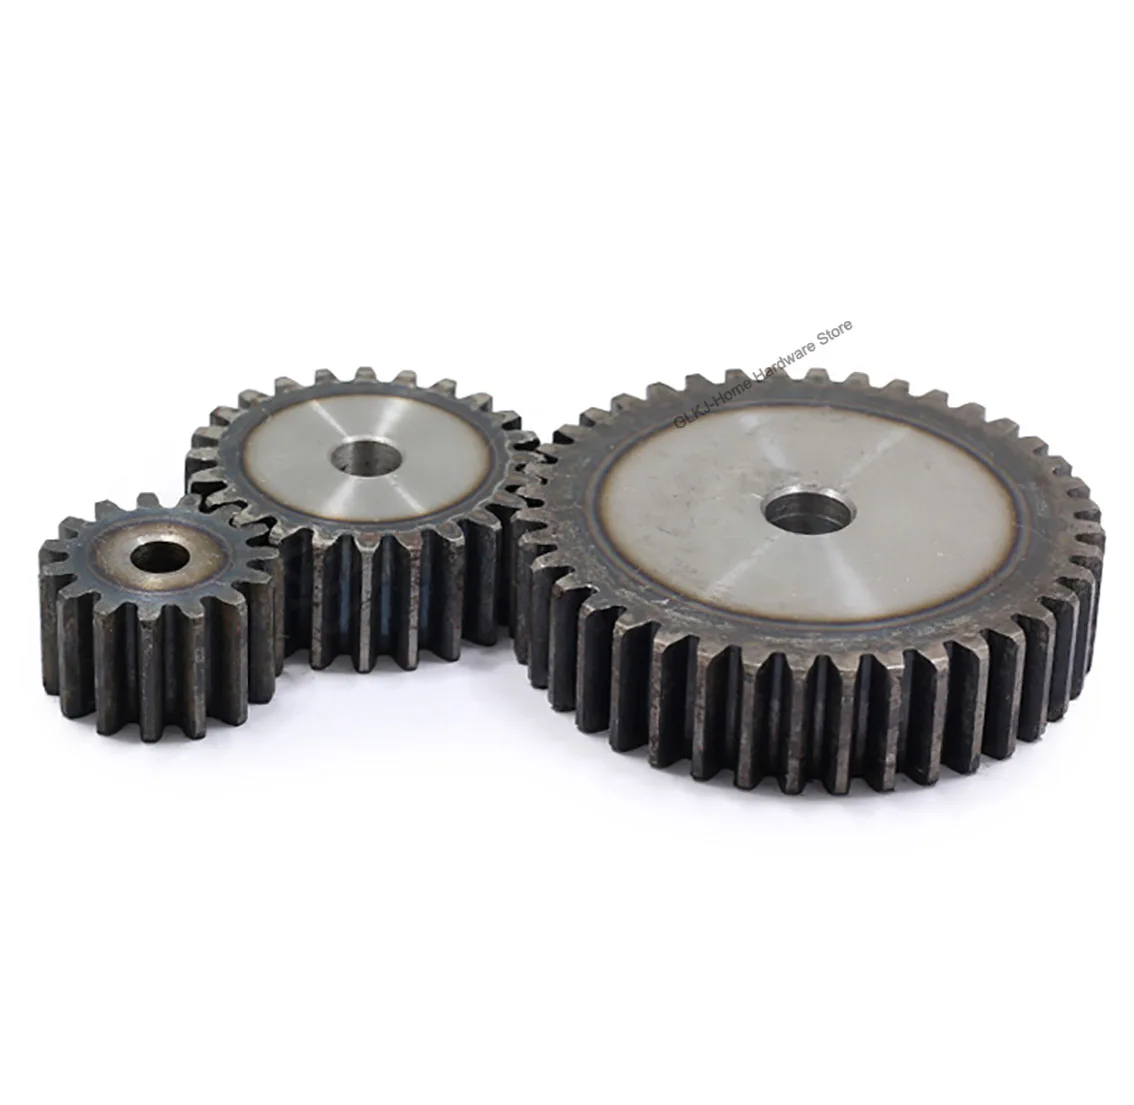 

1Pcs Module 2 Spur Gear 58-61 Tooth Thick 20mm 45# Carbon Steel Metal Transmission Pinion Gear Process Hole 12/15/16mm